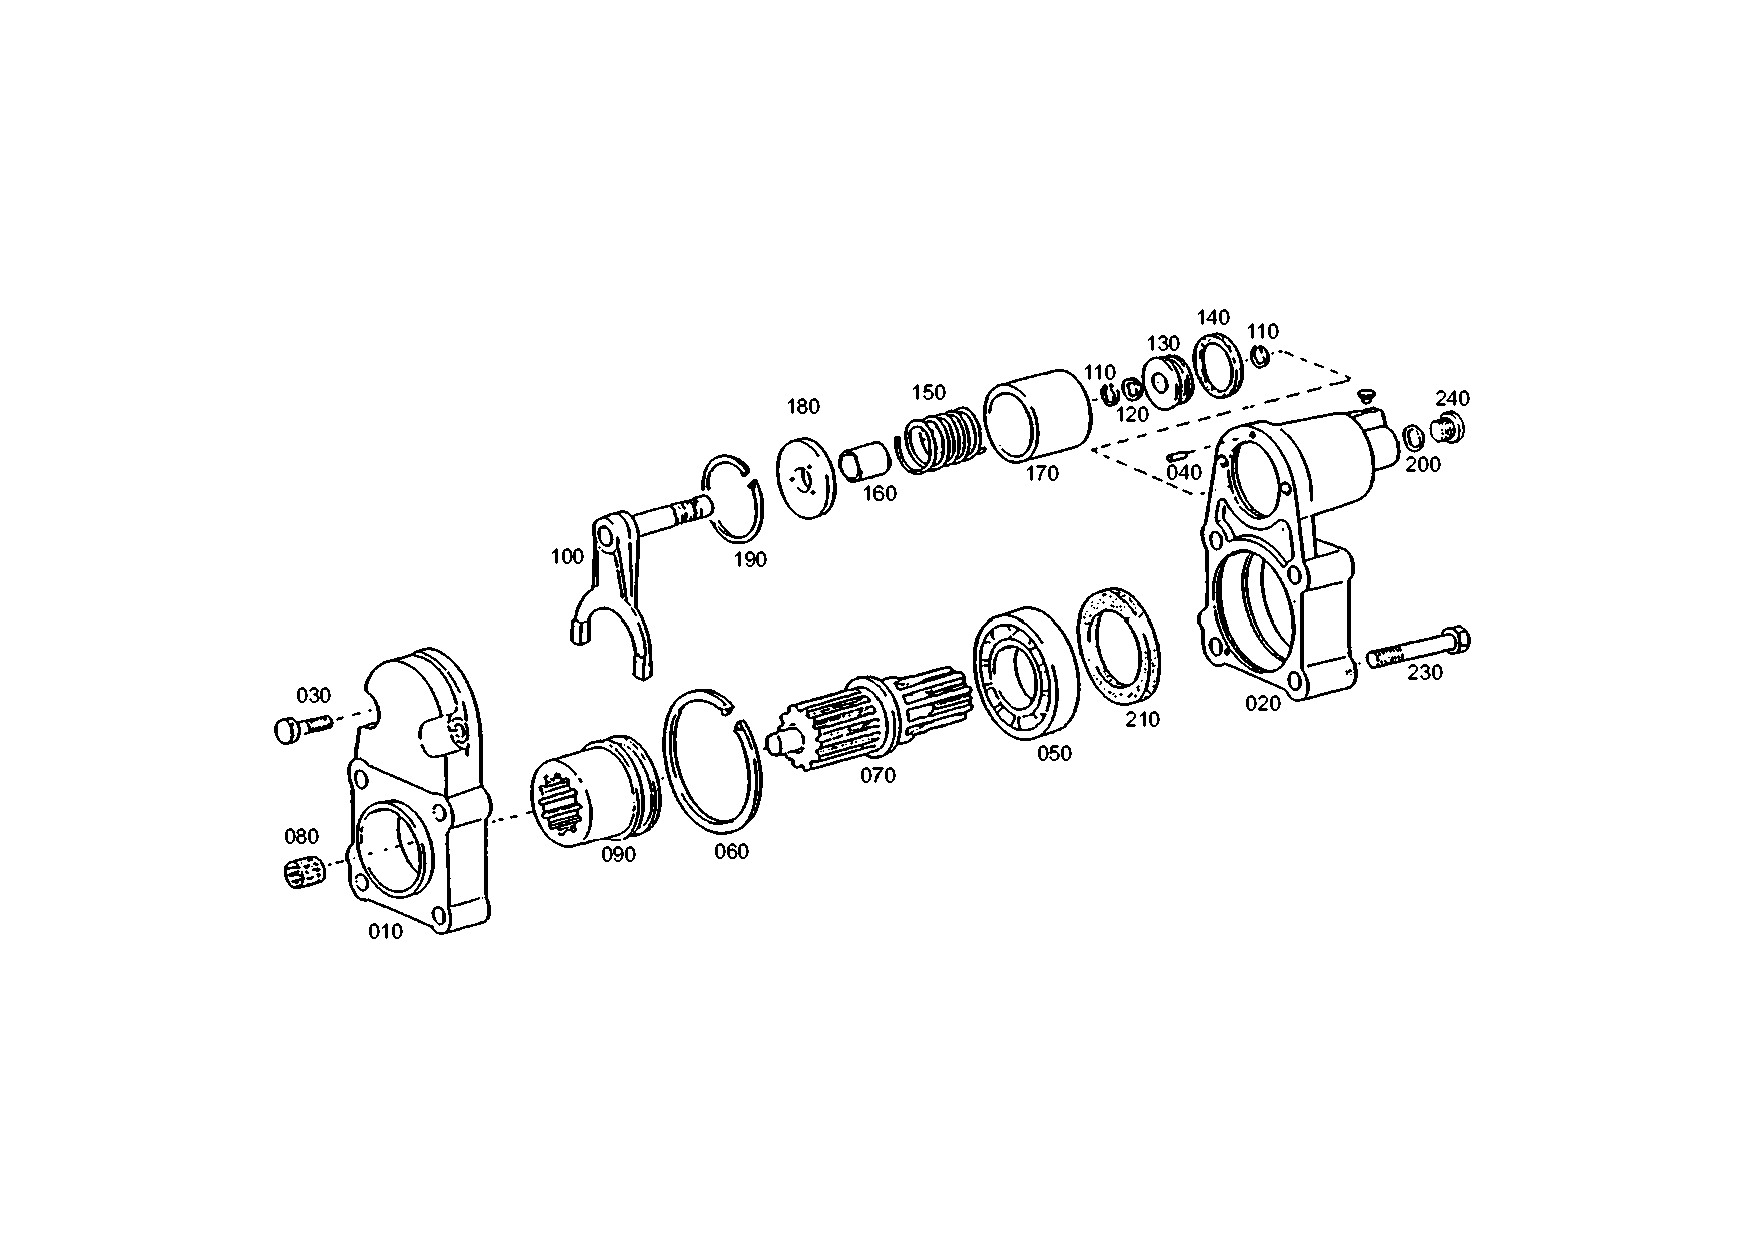 drawing for TITAN GMBH 1-99-976-003 - COMPRESSION SPRING (figure 1)